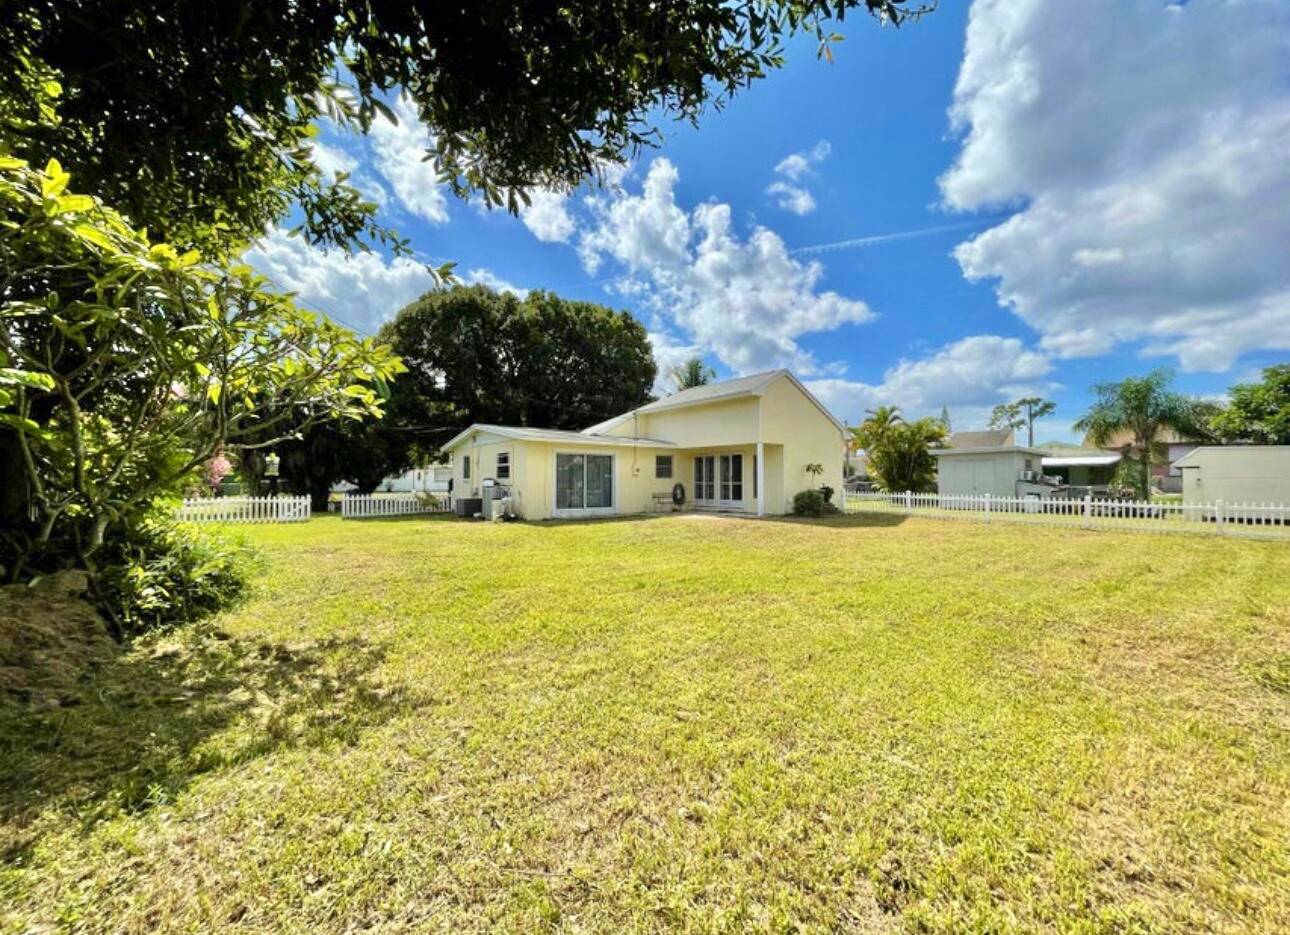 HOME SWEET HOME ! Nestled in Palm Beach Gardens sits this spacious cozy 3 2 cottage on over a third of an acre.